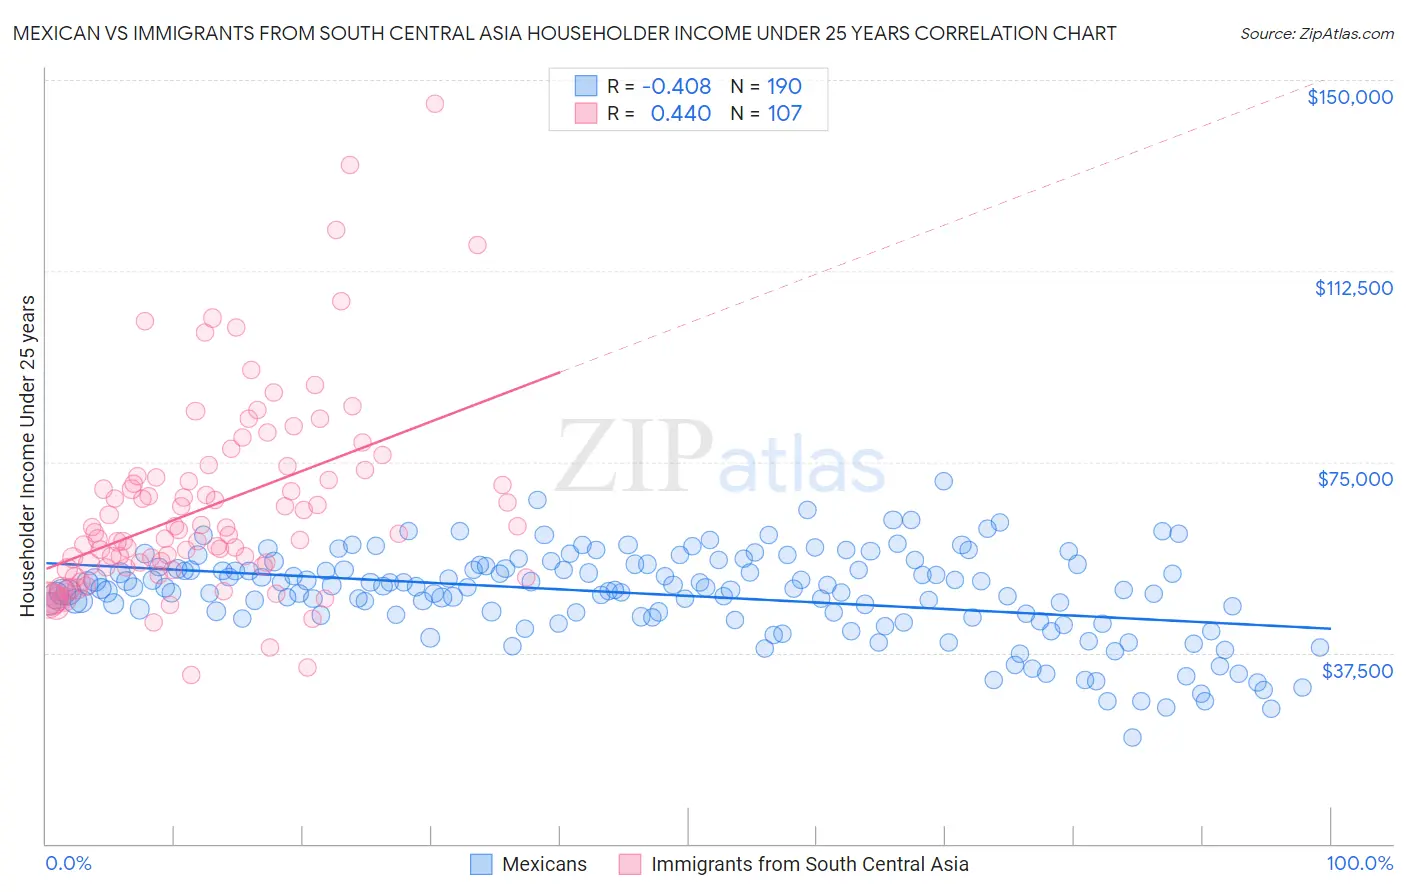 Mexican vs Immigrants from South Central Asia Householder Income Under 25 years